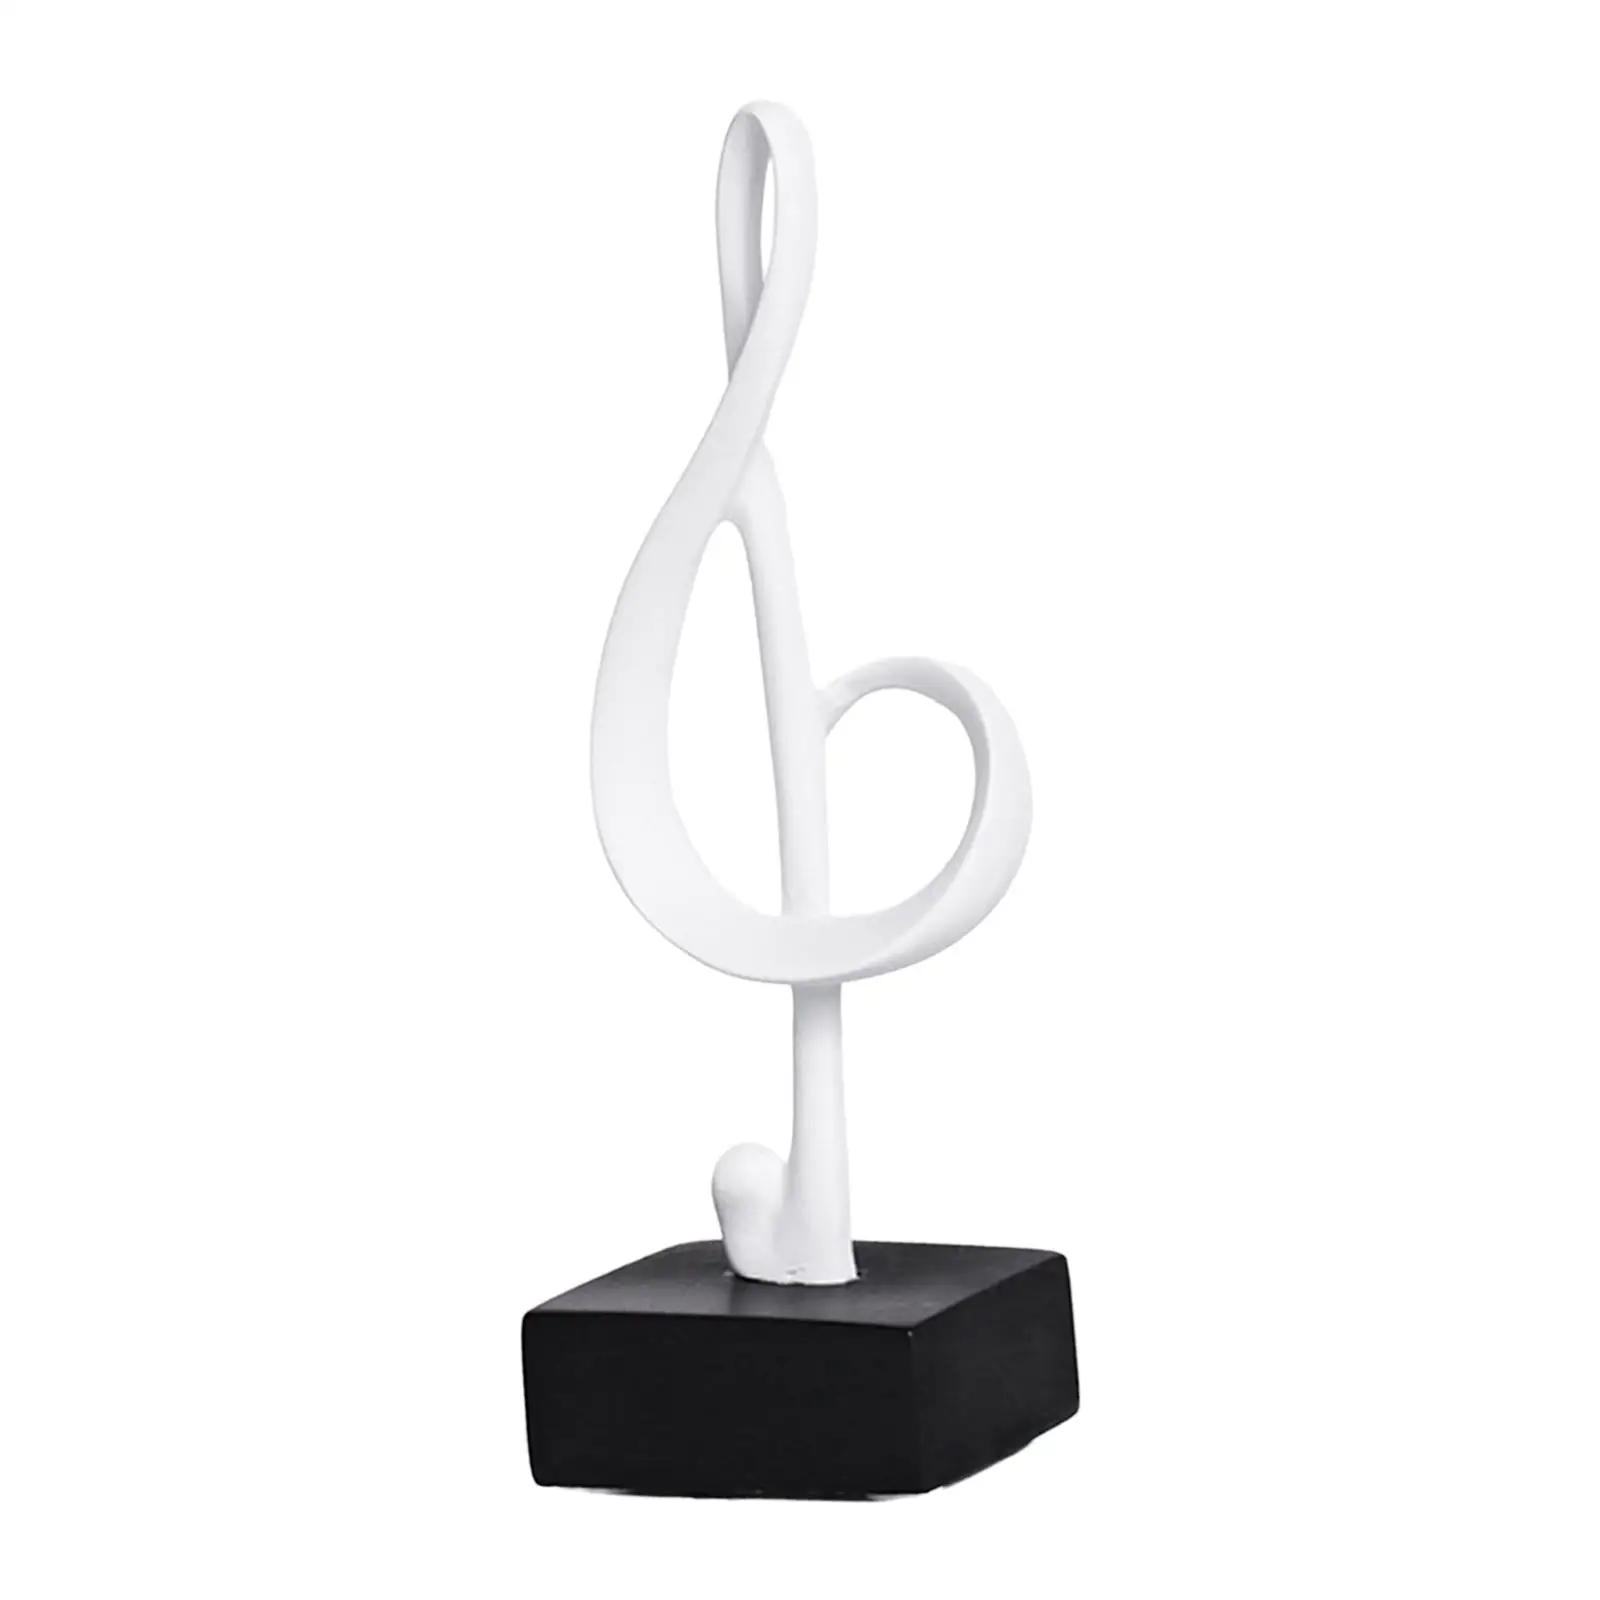 Creative music note figure resin statue sculpture artwork for living room office